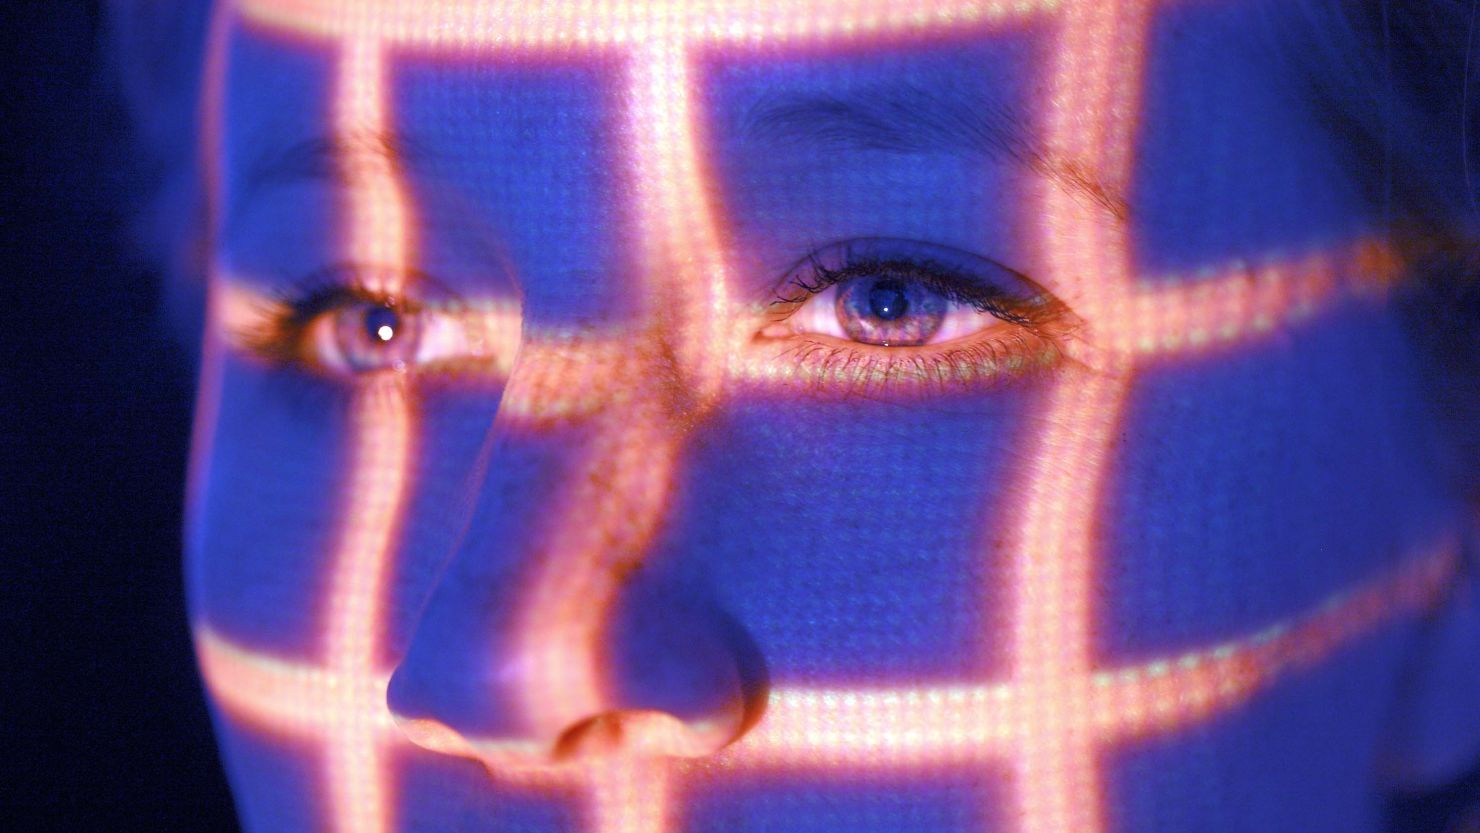 New AI technology could identify rare genetic diseases from patients' facial images.